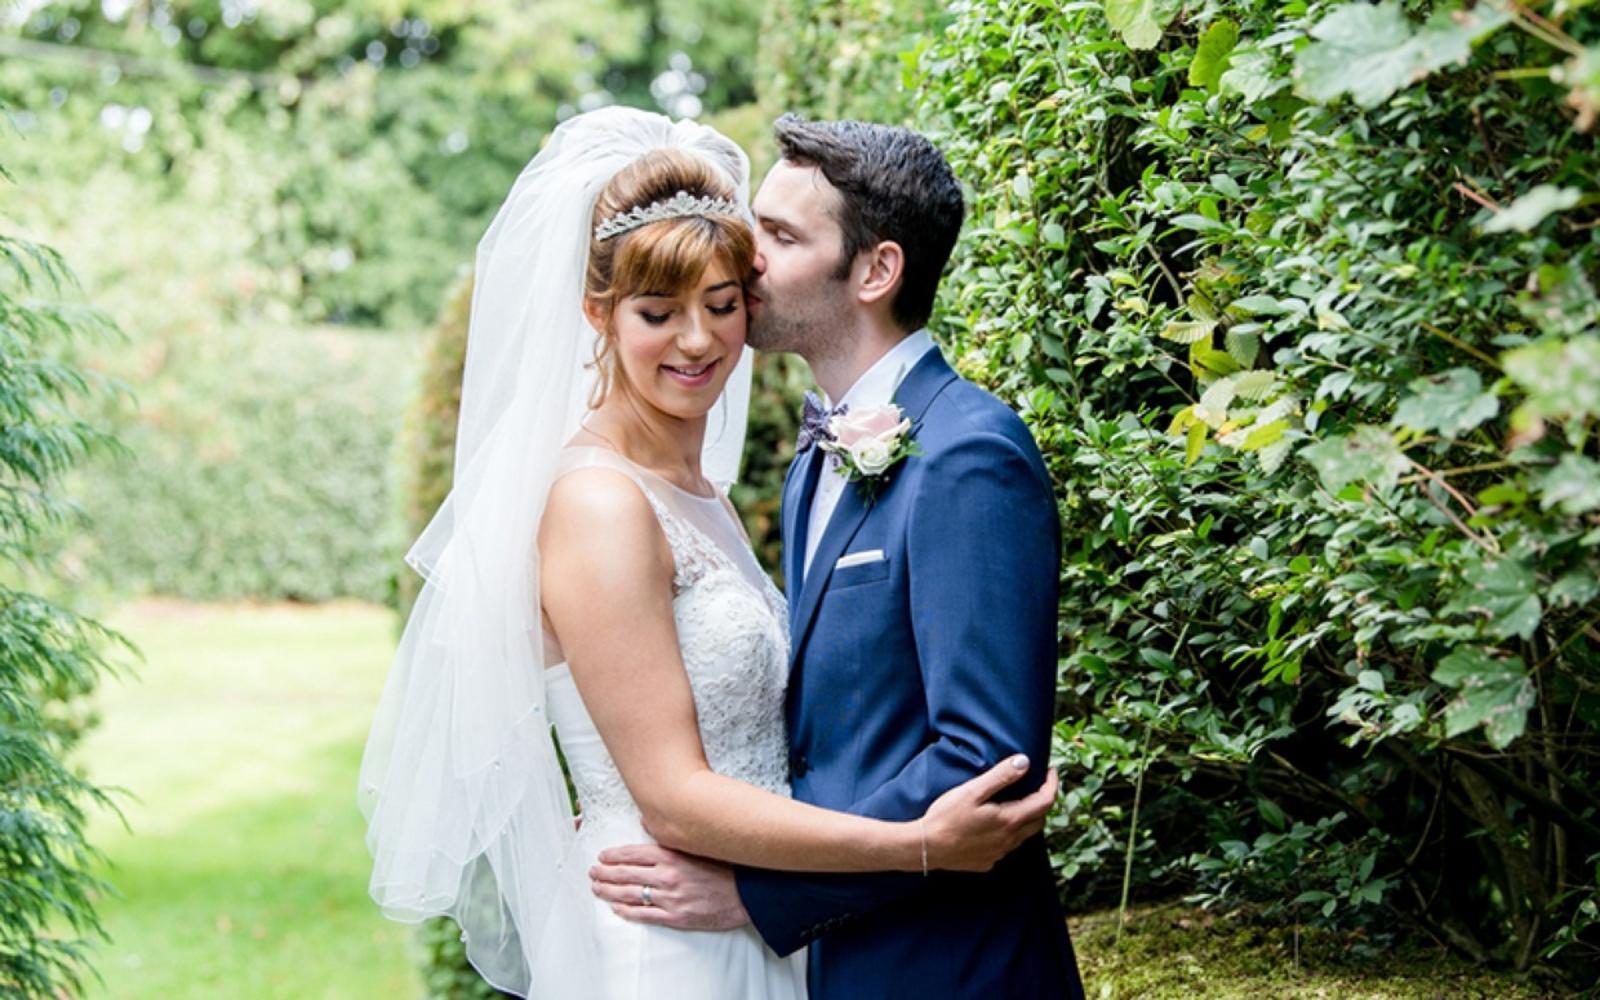 Capture Every Moment real wedding photography Cirencester Hare & Hounds Tetbury tiara